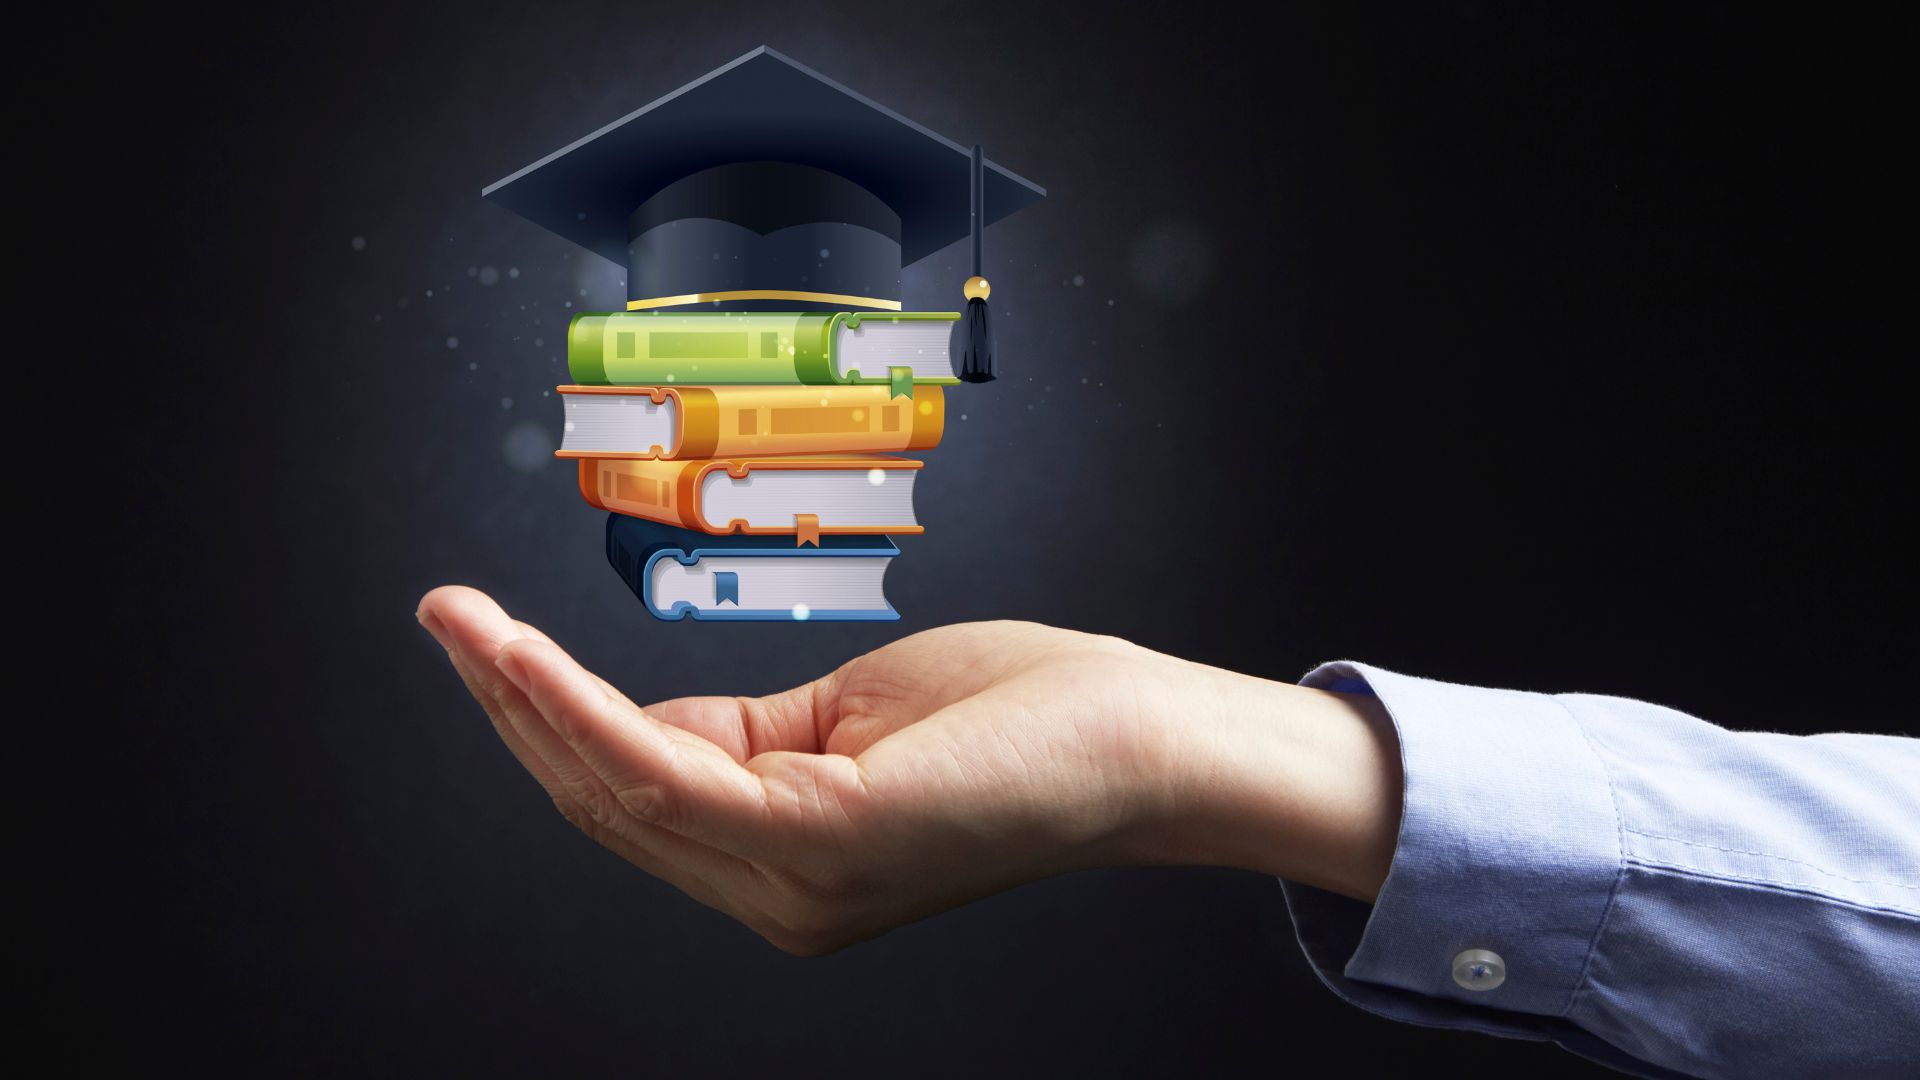 graduate reaching out his hand and in it, hovering above it, is cartoon digital image of a graduate cap and stack of school books